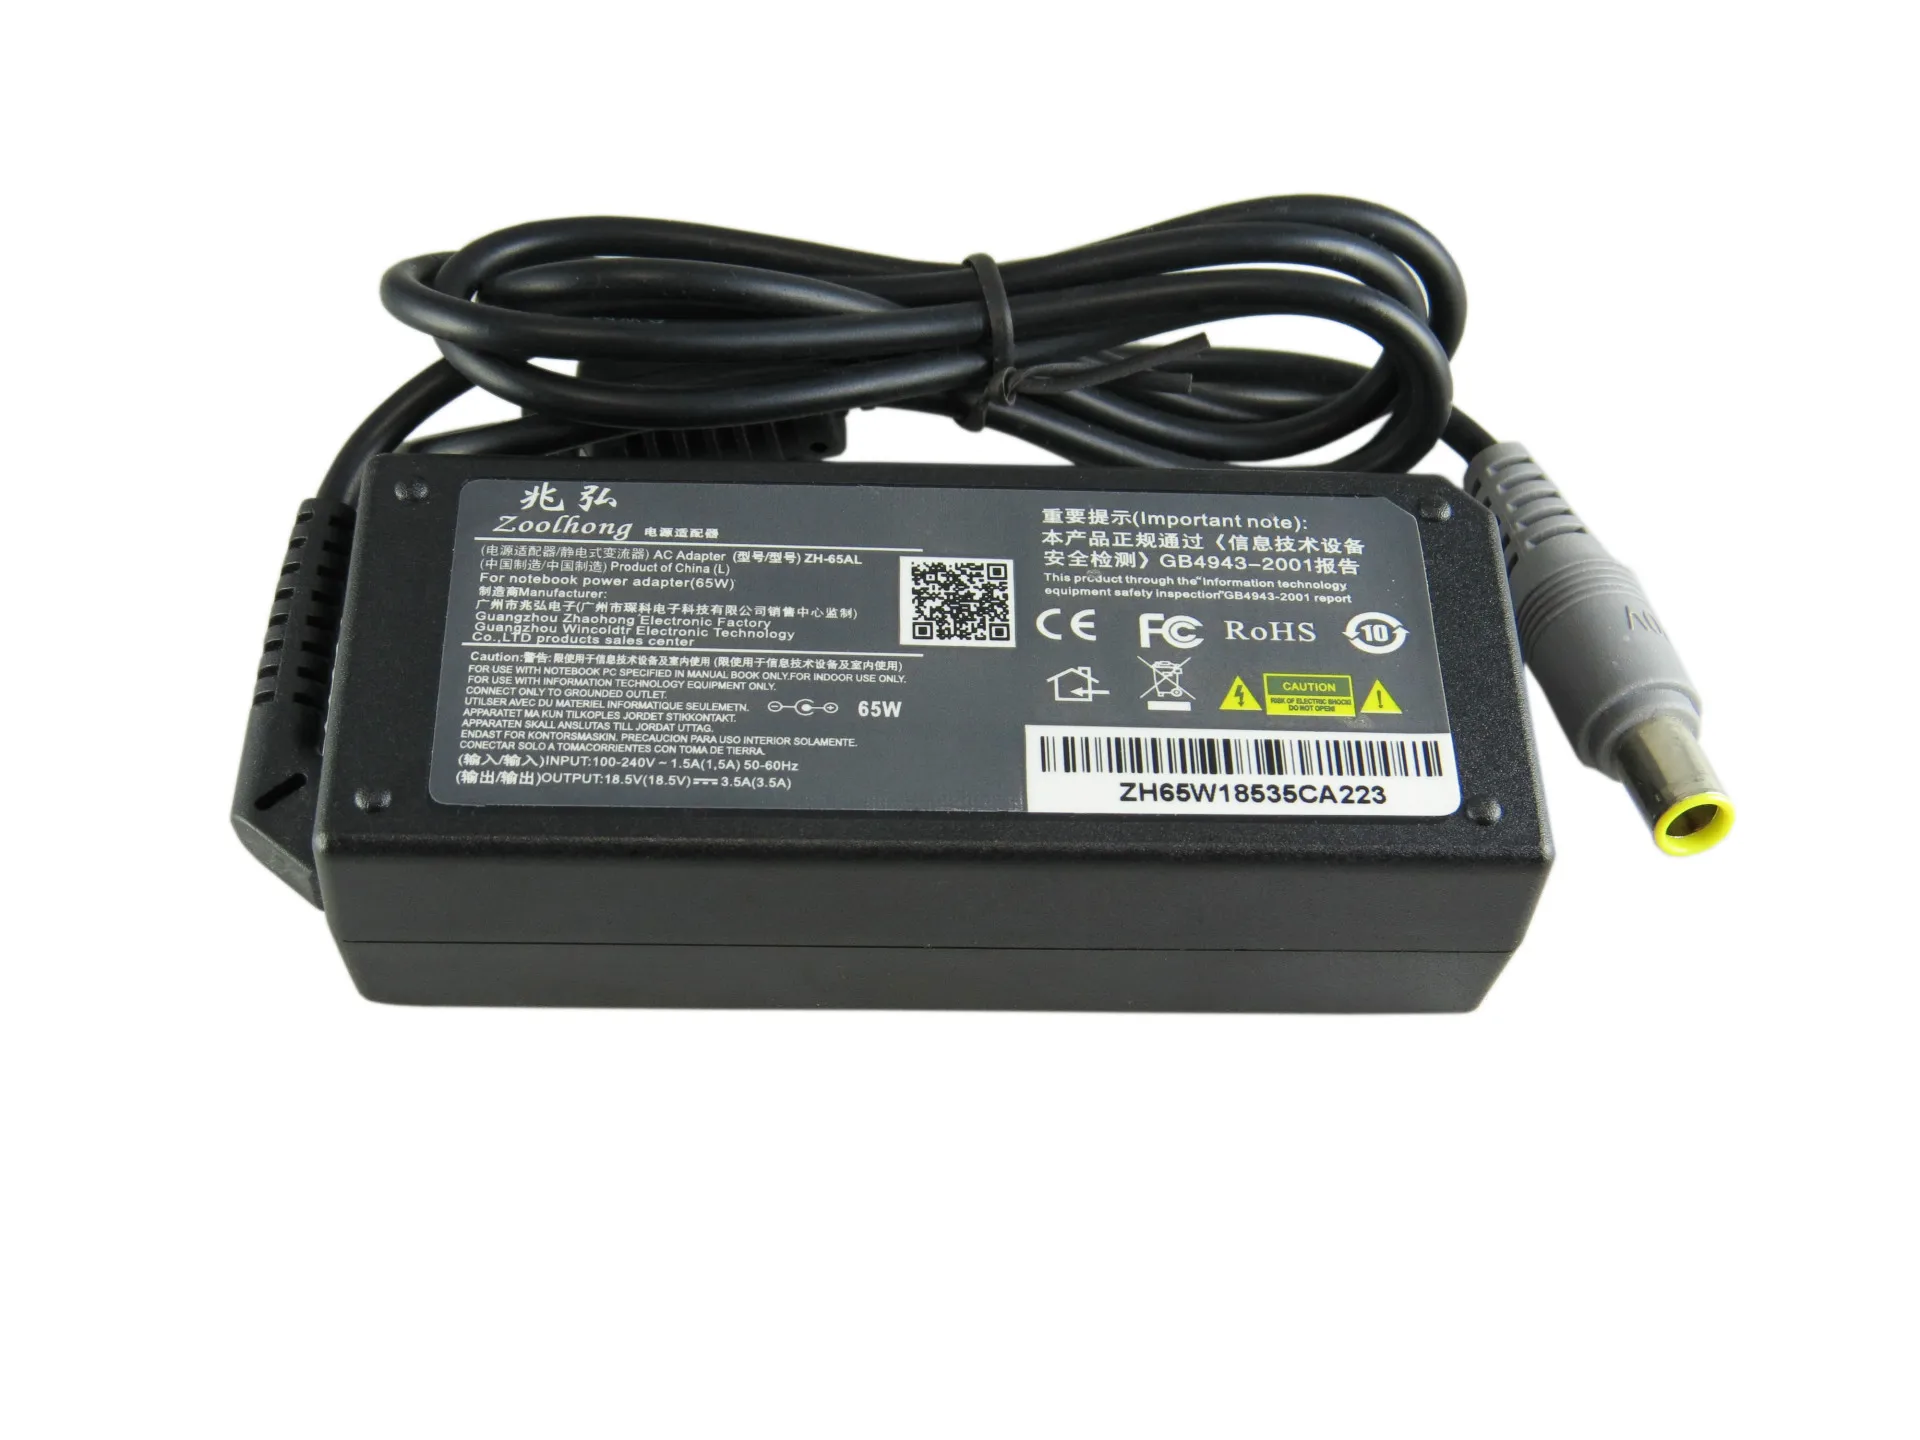 20v 3 25a 65w laptop ac power adapter charger for lenovo t410 t510 sl410 sl410k sl510 sl510k t510i x201 x220 x230 free global shipping